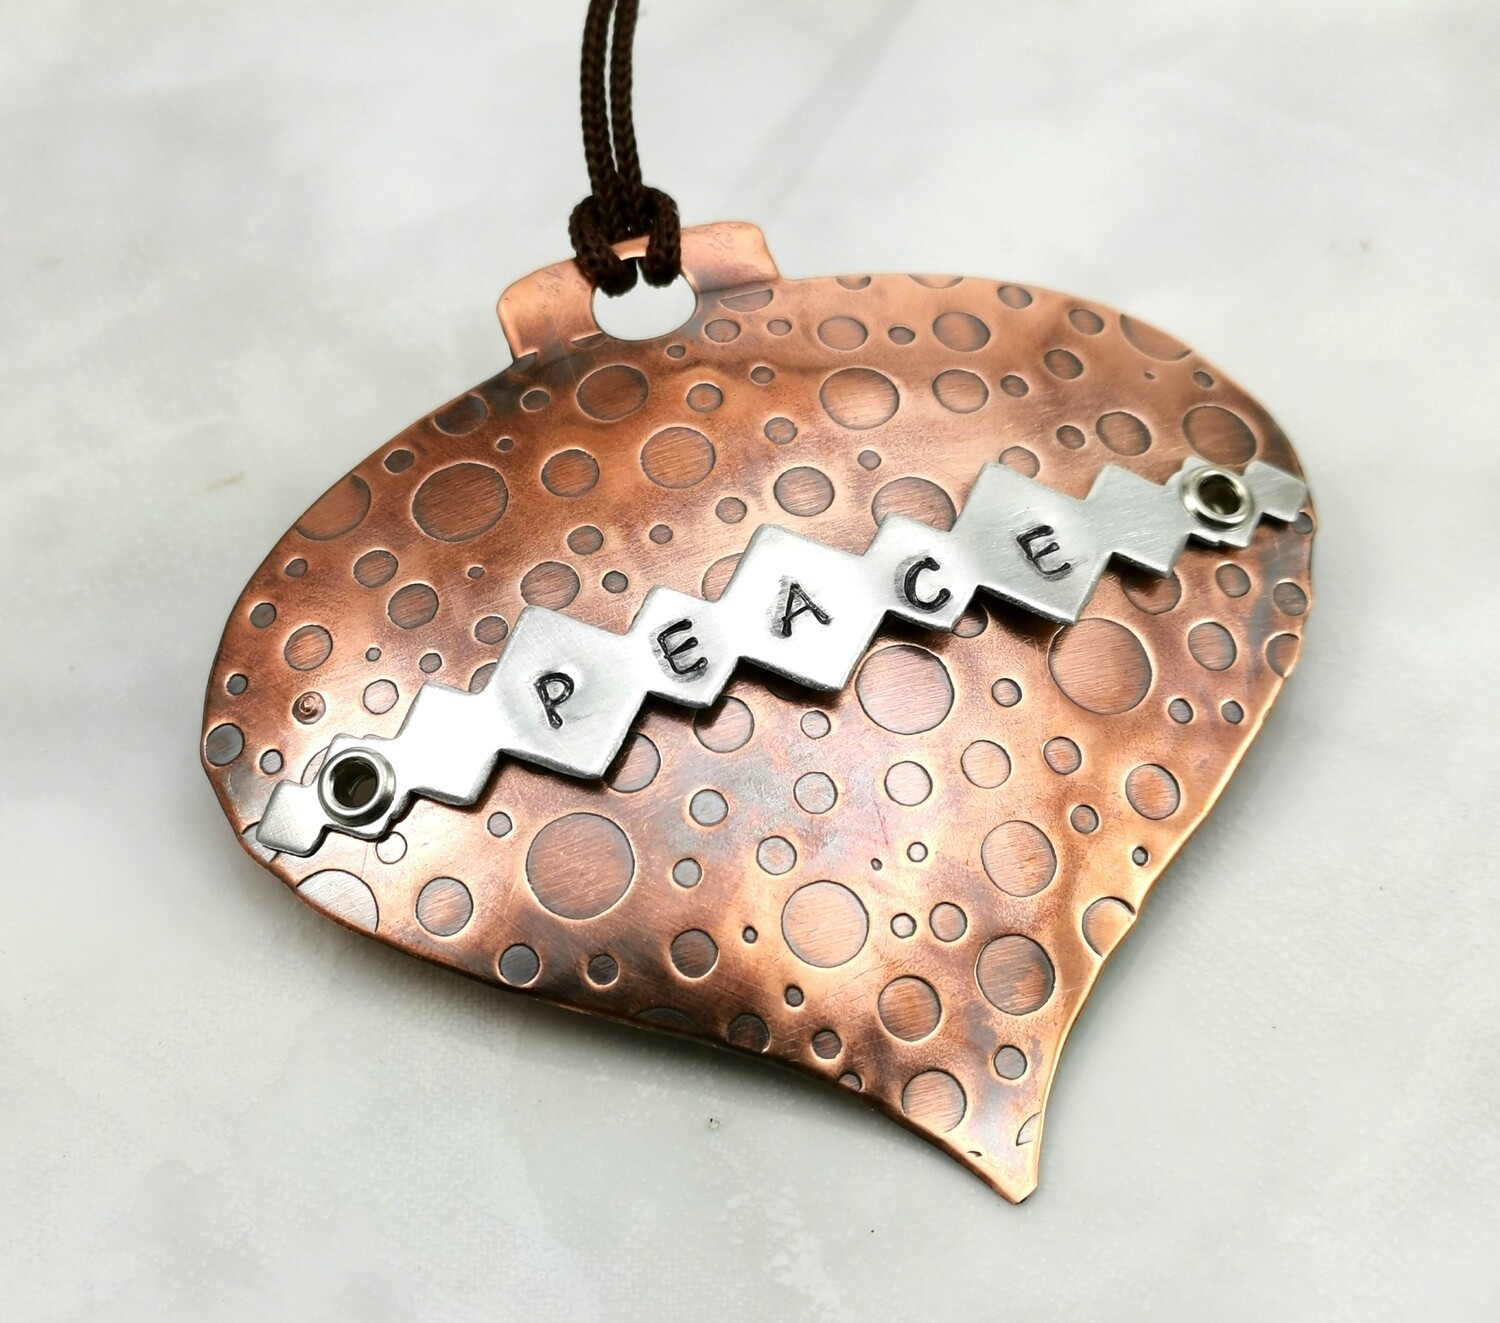 Domed Etched Textured Heart Shaped Antiqued Copper Ornaments